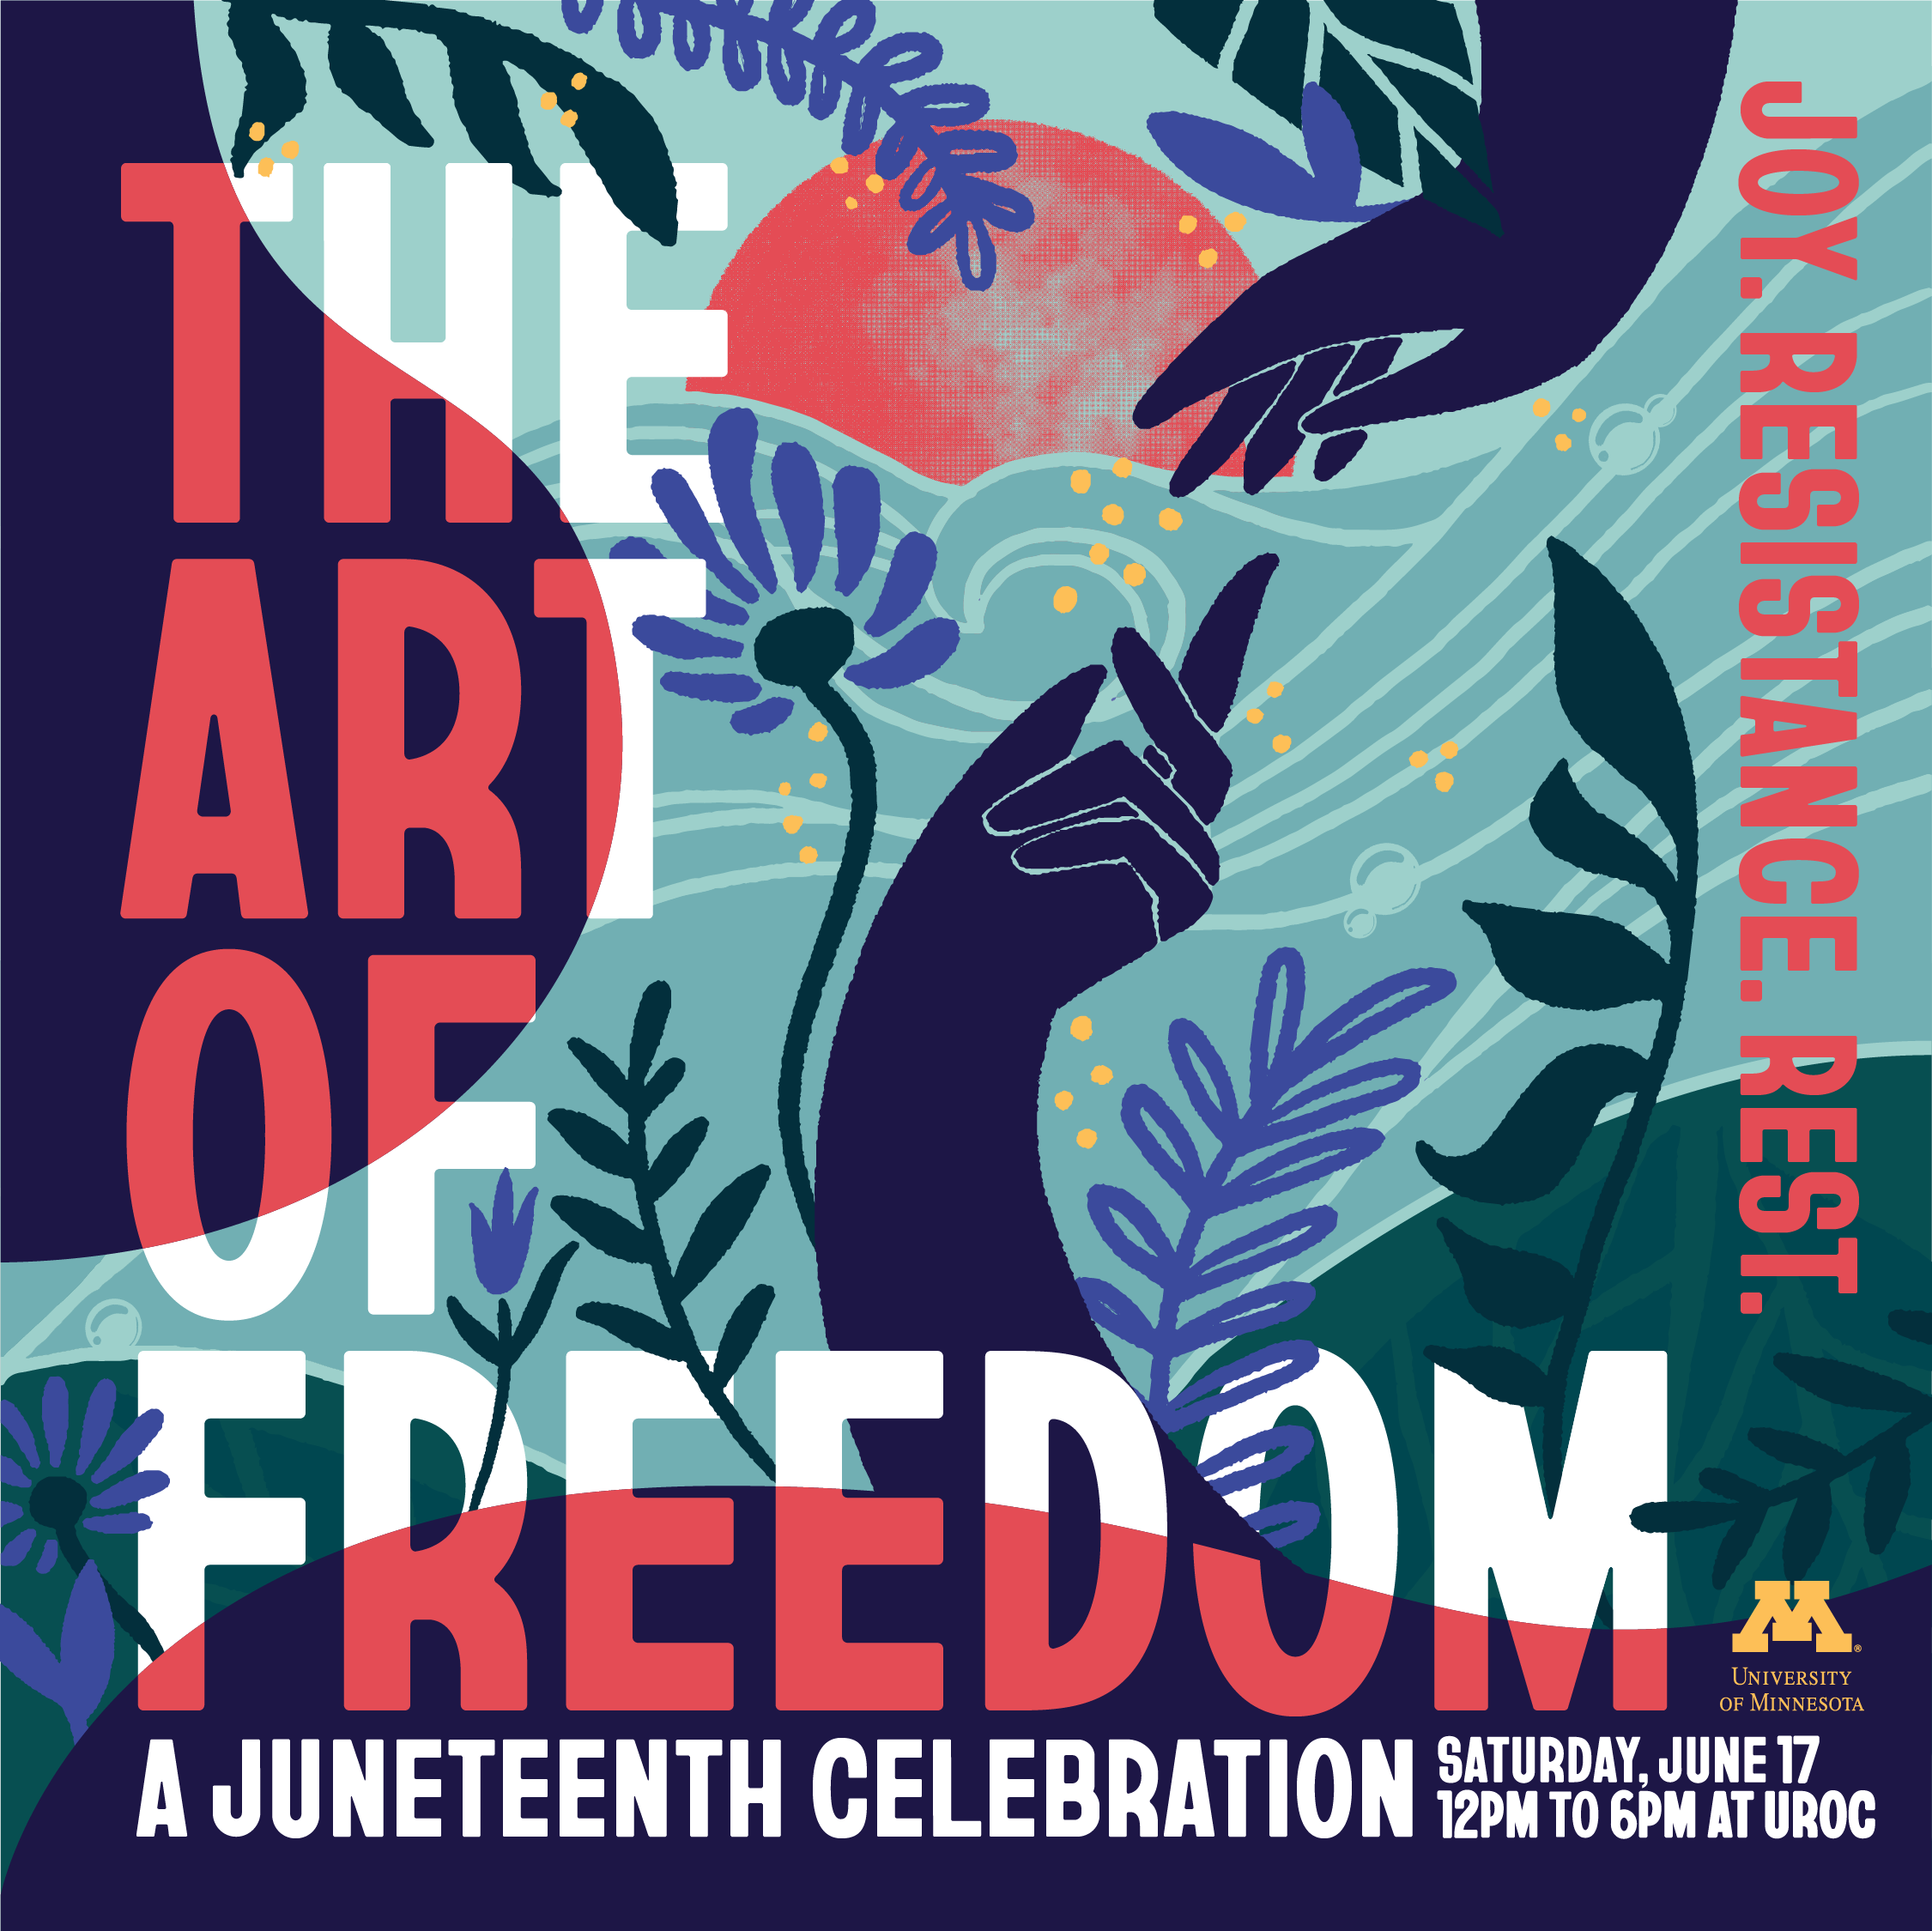 The Art of Freedom: A Juneteenth Celebration on June 17 from 12 PM to 6 PM